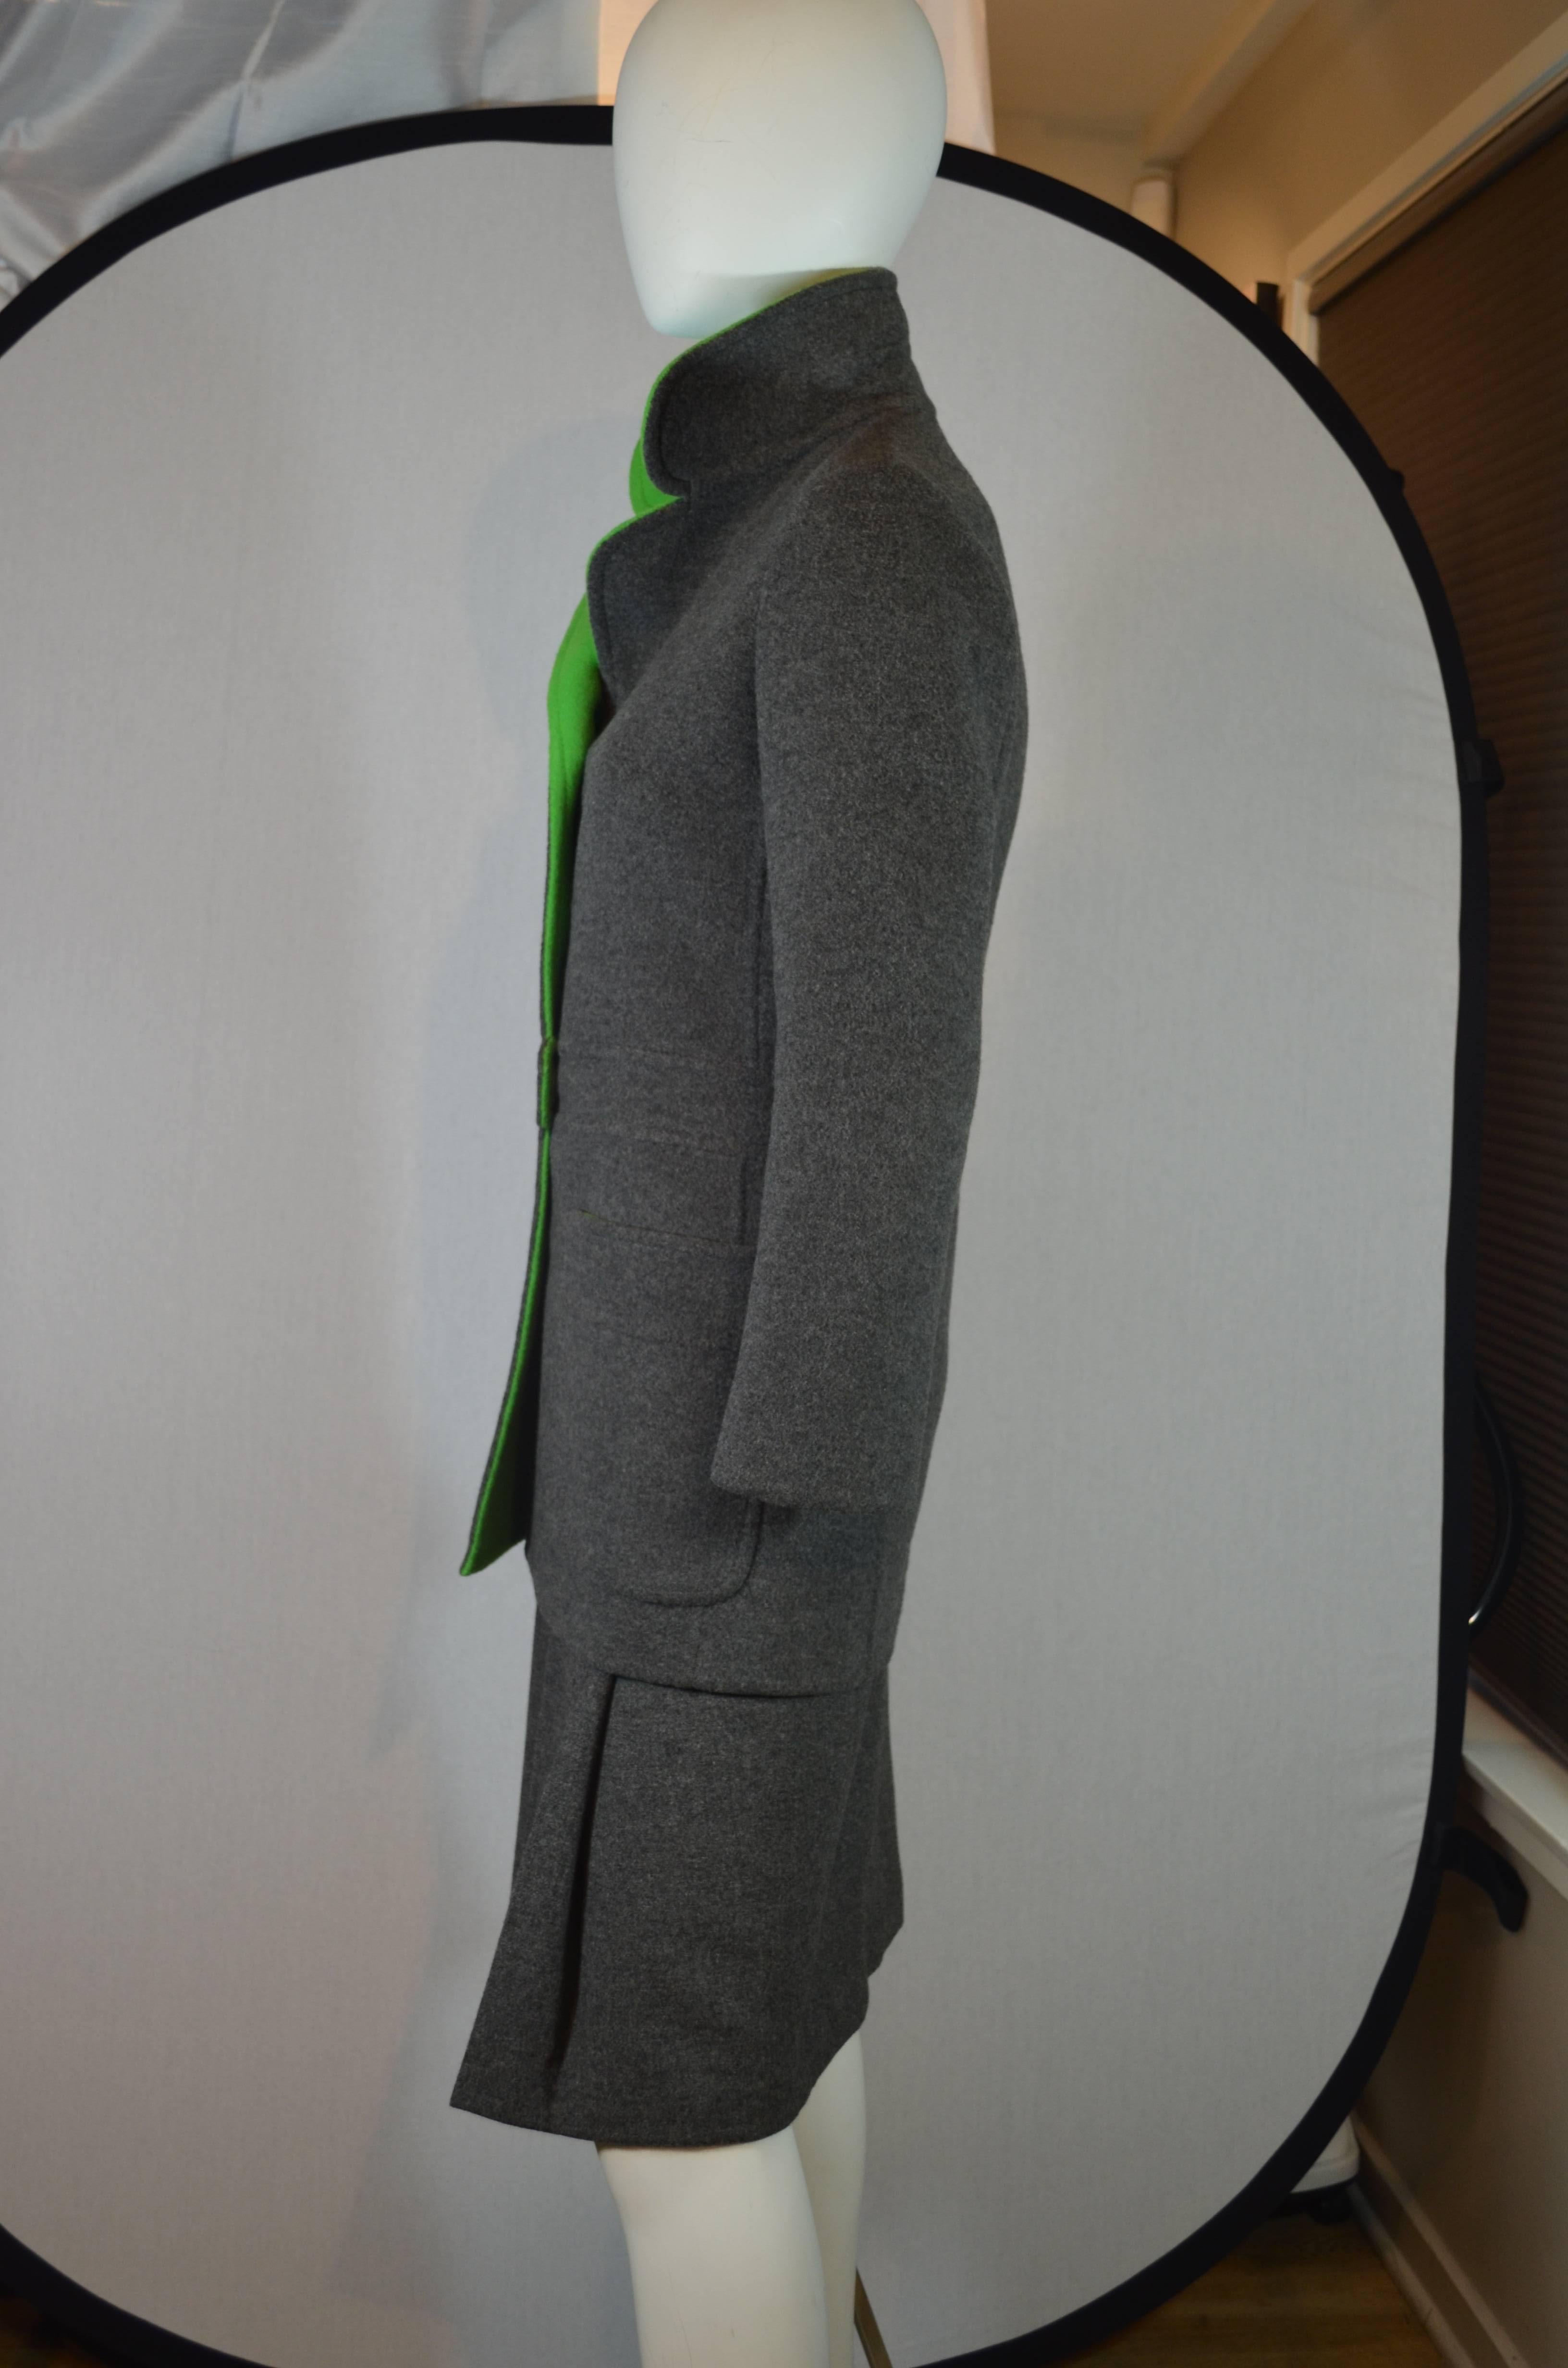 Christian Dior for I.Magnin  grey wool skirt with matching grey suit jacket with apple green trim collar.  Grace Kelly was photographed wearing this suit in 1972. The jacket has a button up front, welted belt detail at waist, patch pockets and hip